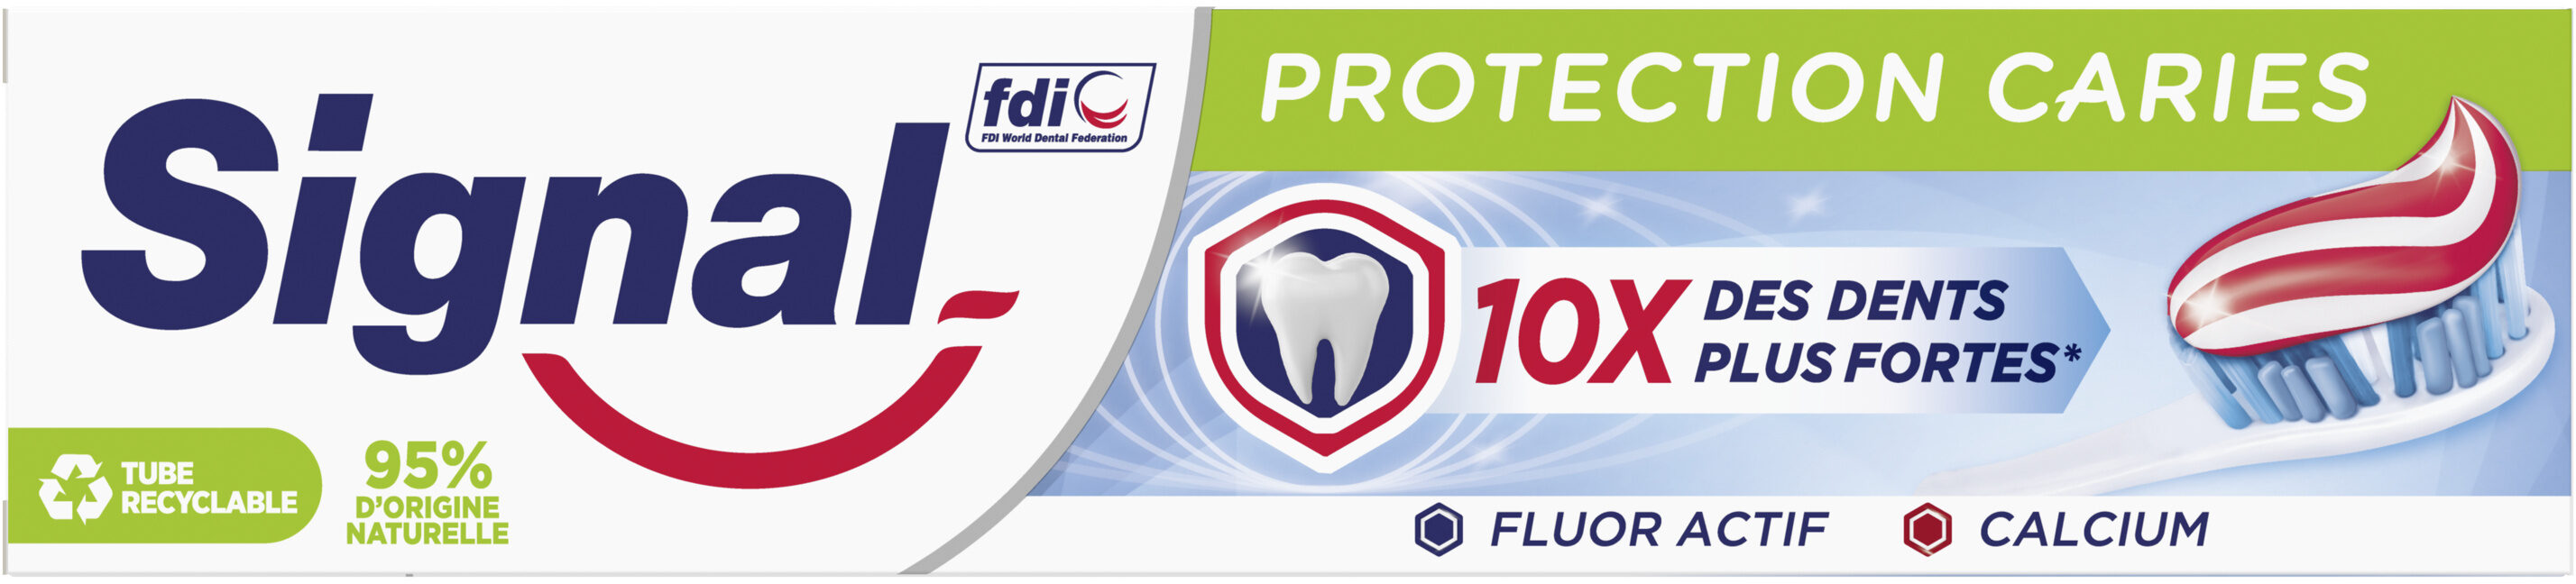 Signal Dentifrice Protection Caries 125ml - 製品 - fr